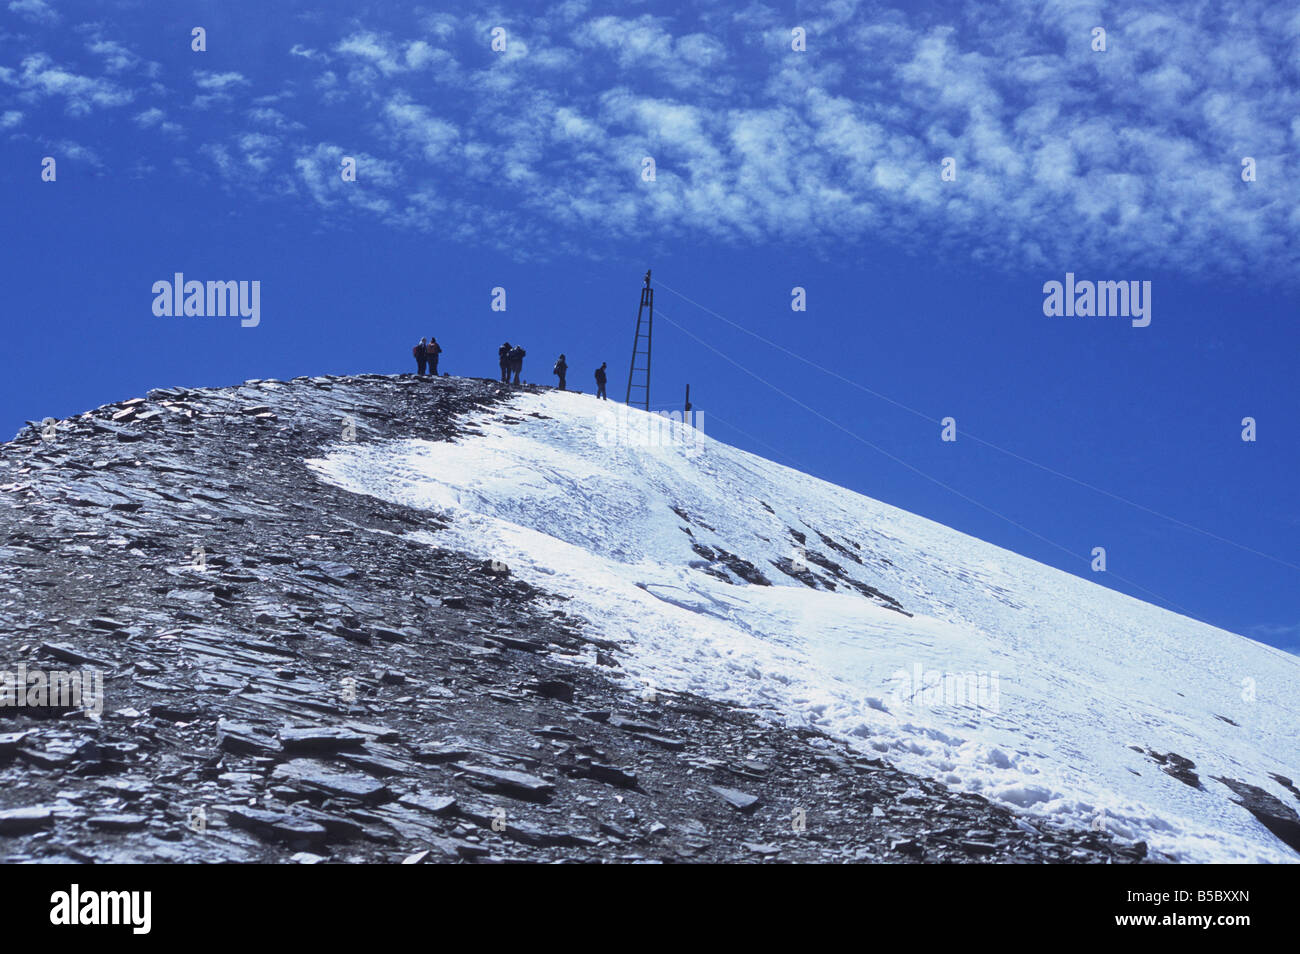 Hikers approaching summit of Mt Chacaltaya, part of receding glacier on right, Cordillera Real, Bolivia Stock Photo